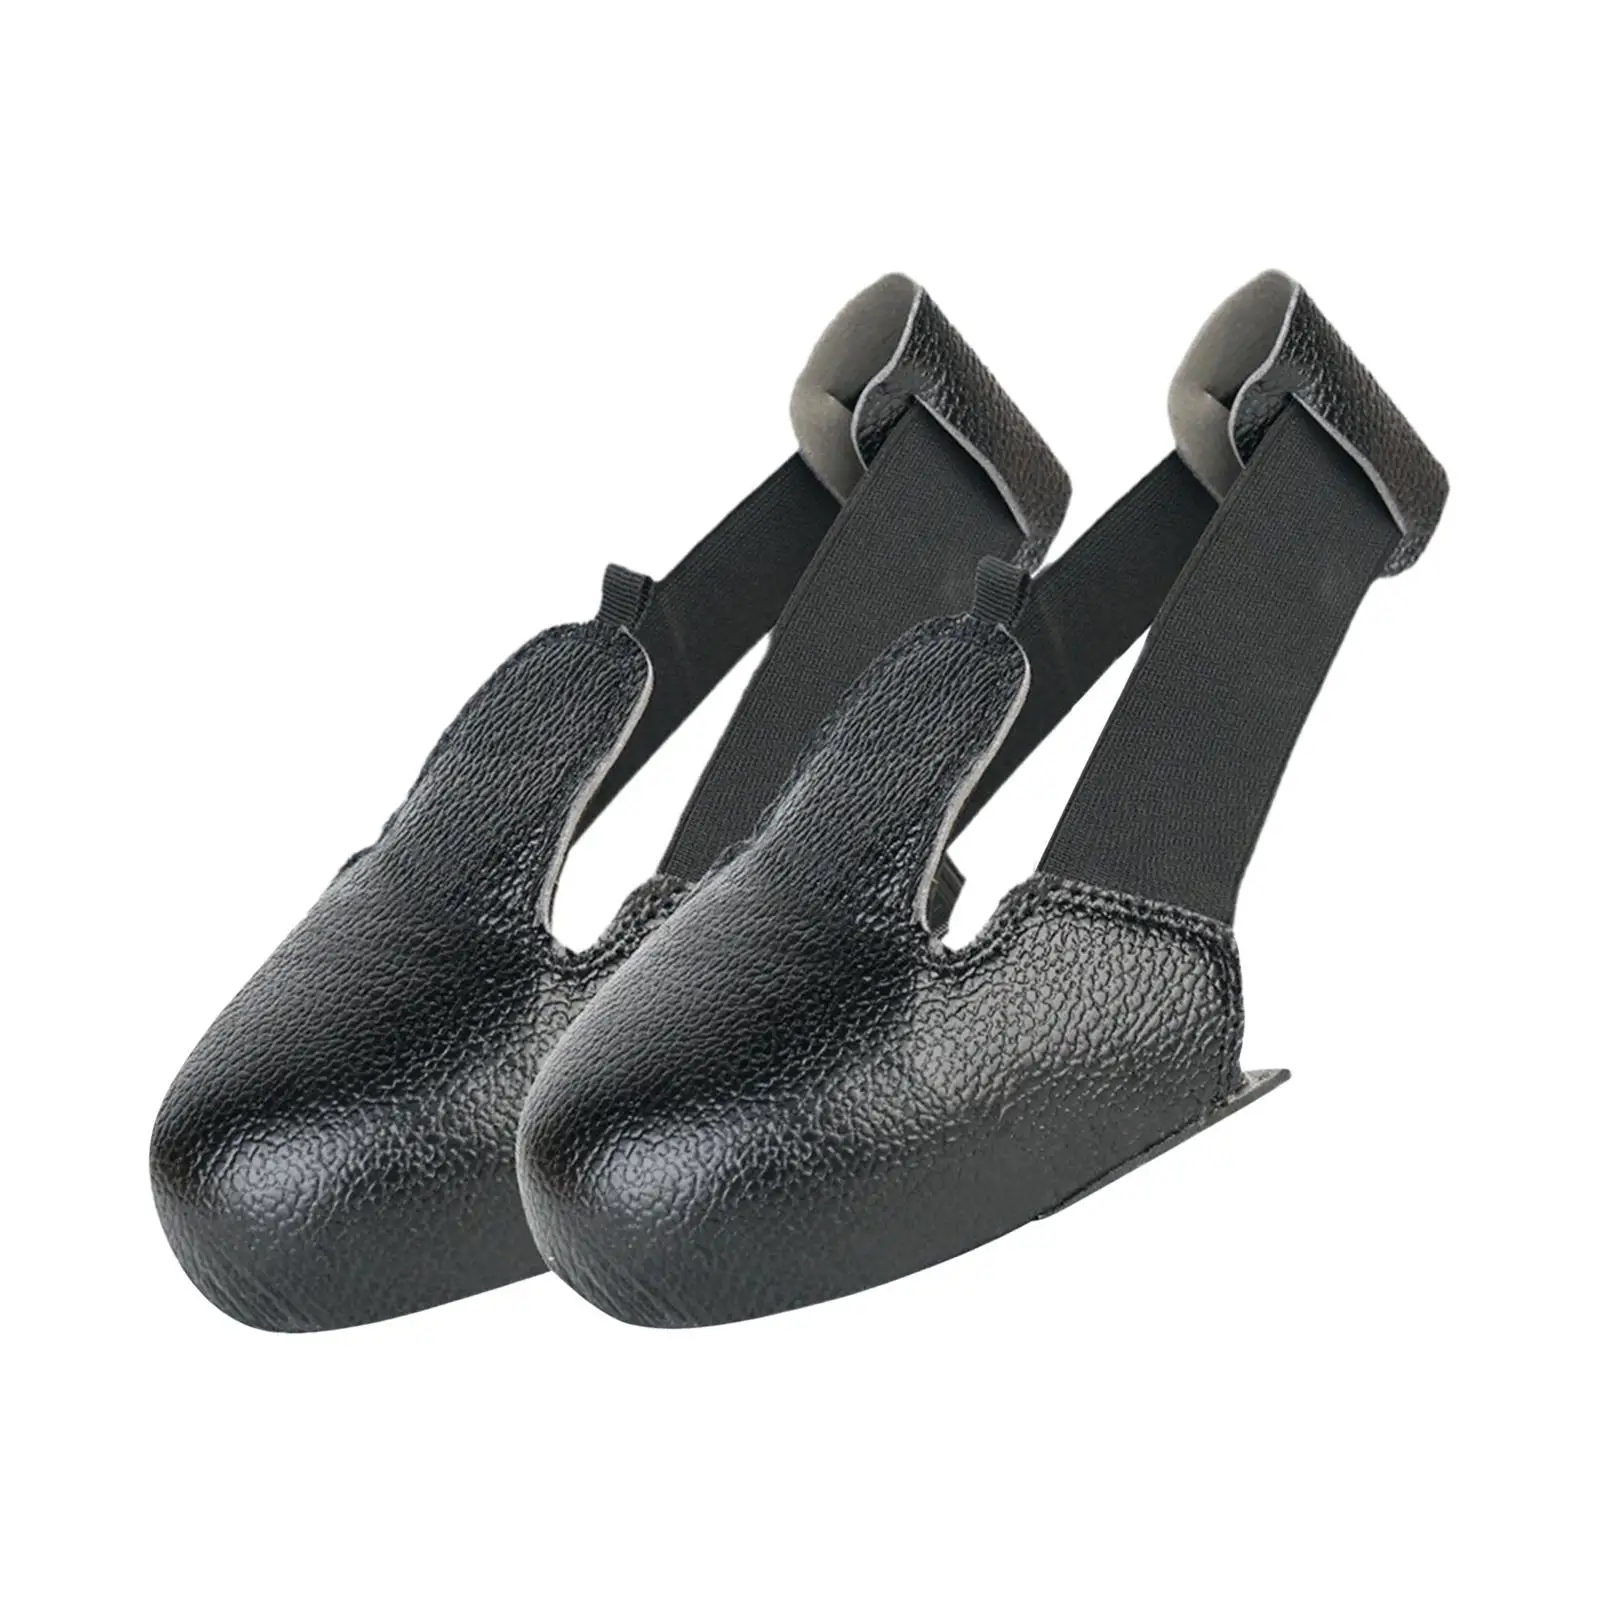 Stretch Leather Overshoes Toe Cap Safety Shoe Caps Universal Leather Shoes Covers Overshoes Accessories